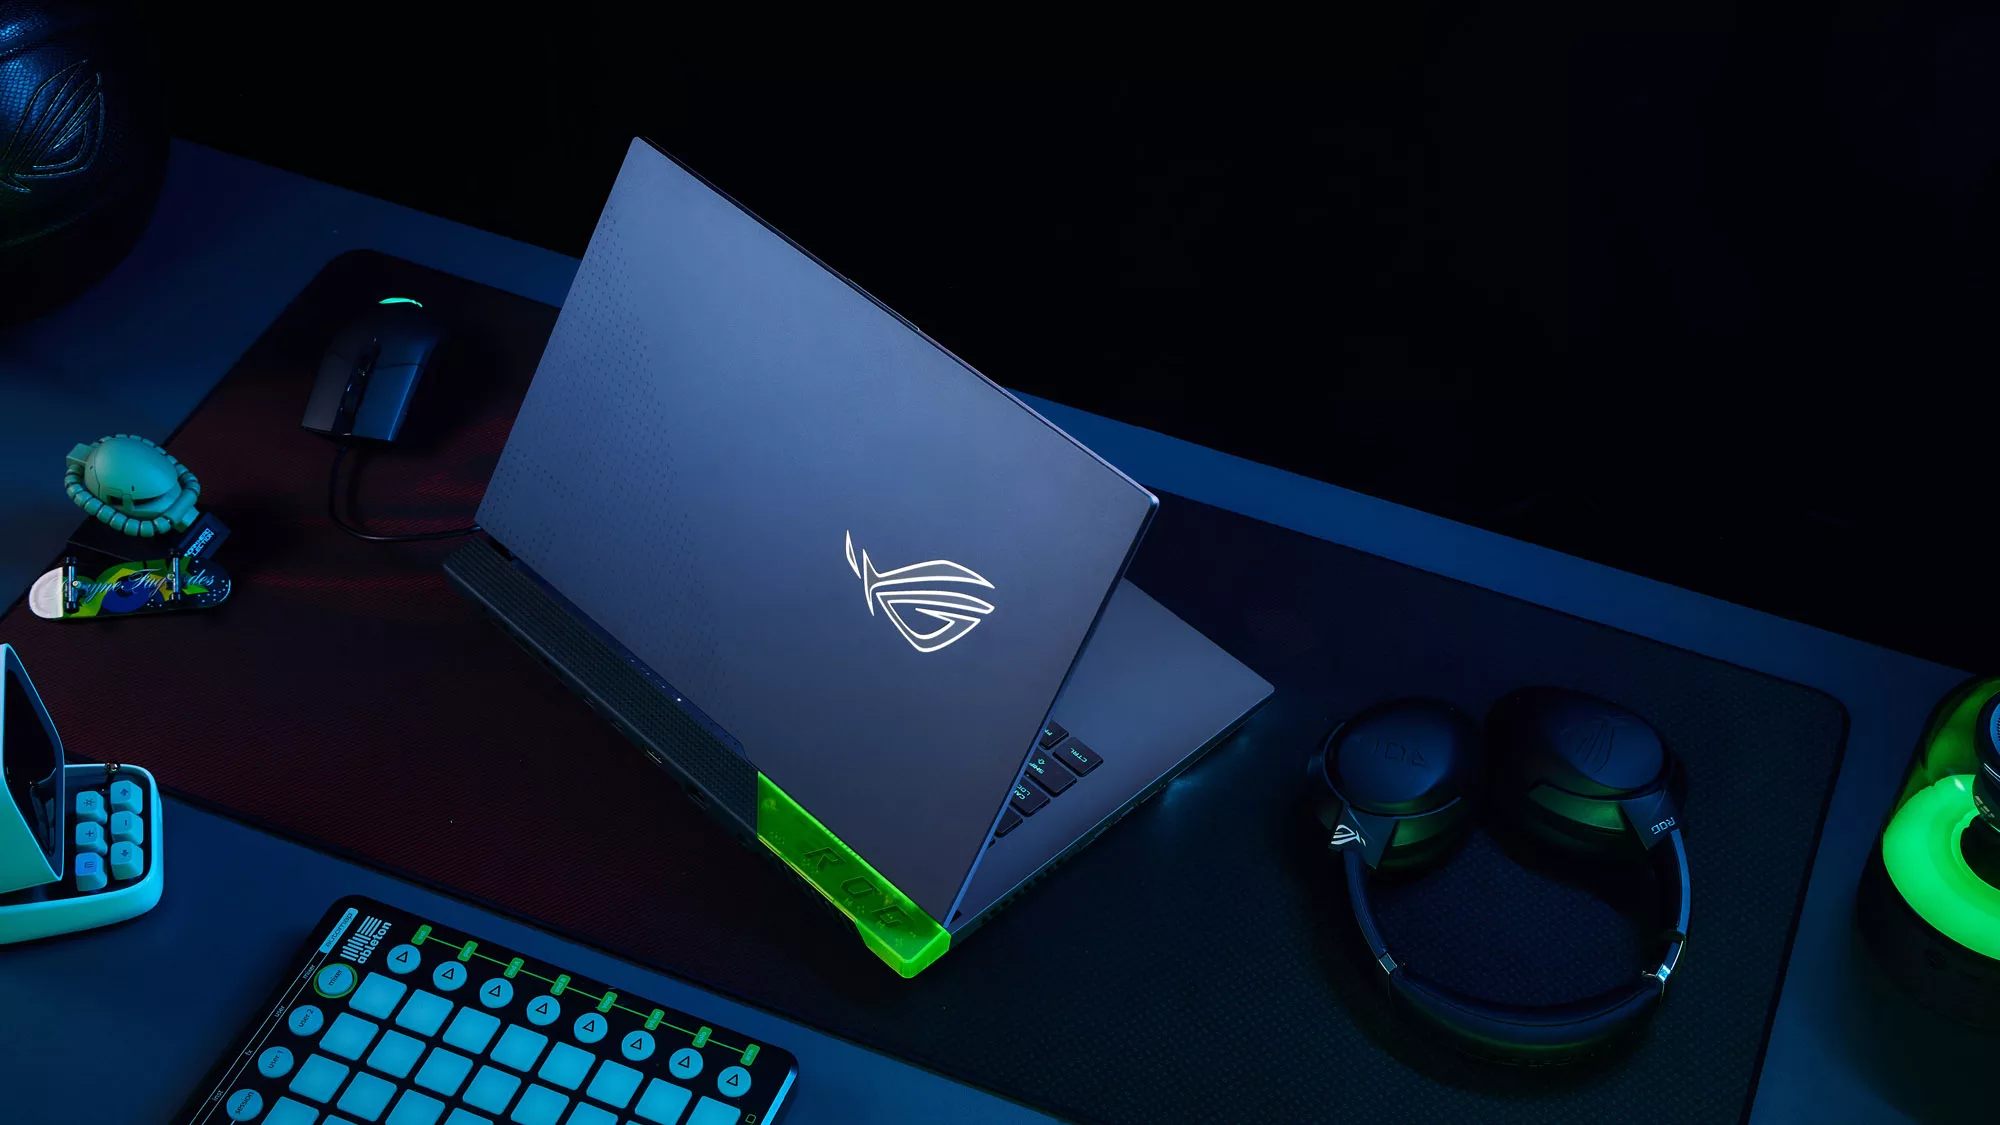 Photo of the Strix SCAR laptop, with a wired mouse and wireless headset on a large deskpad.